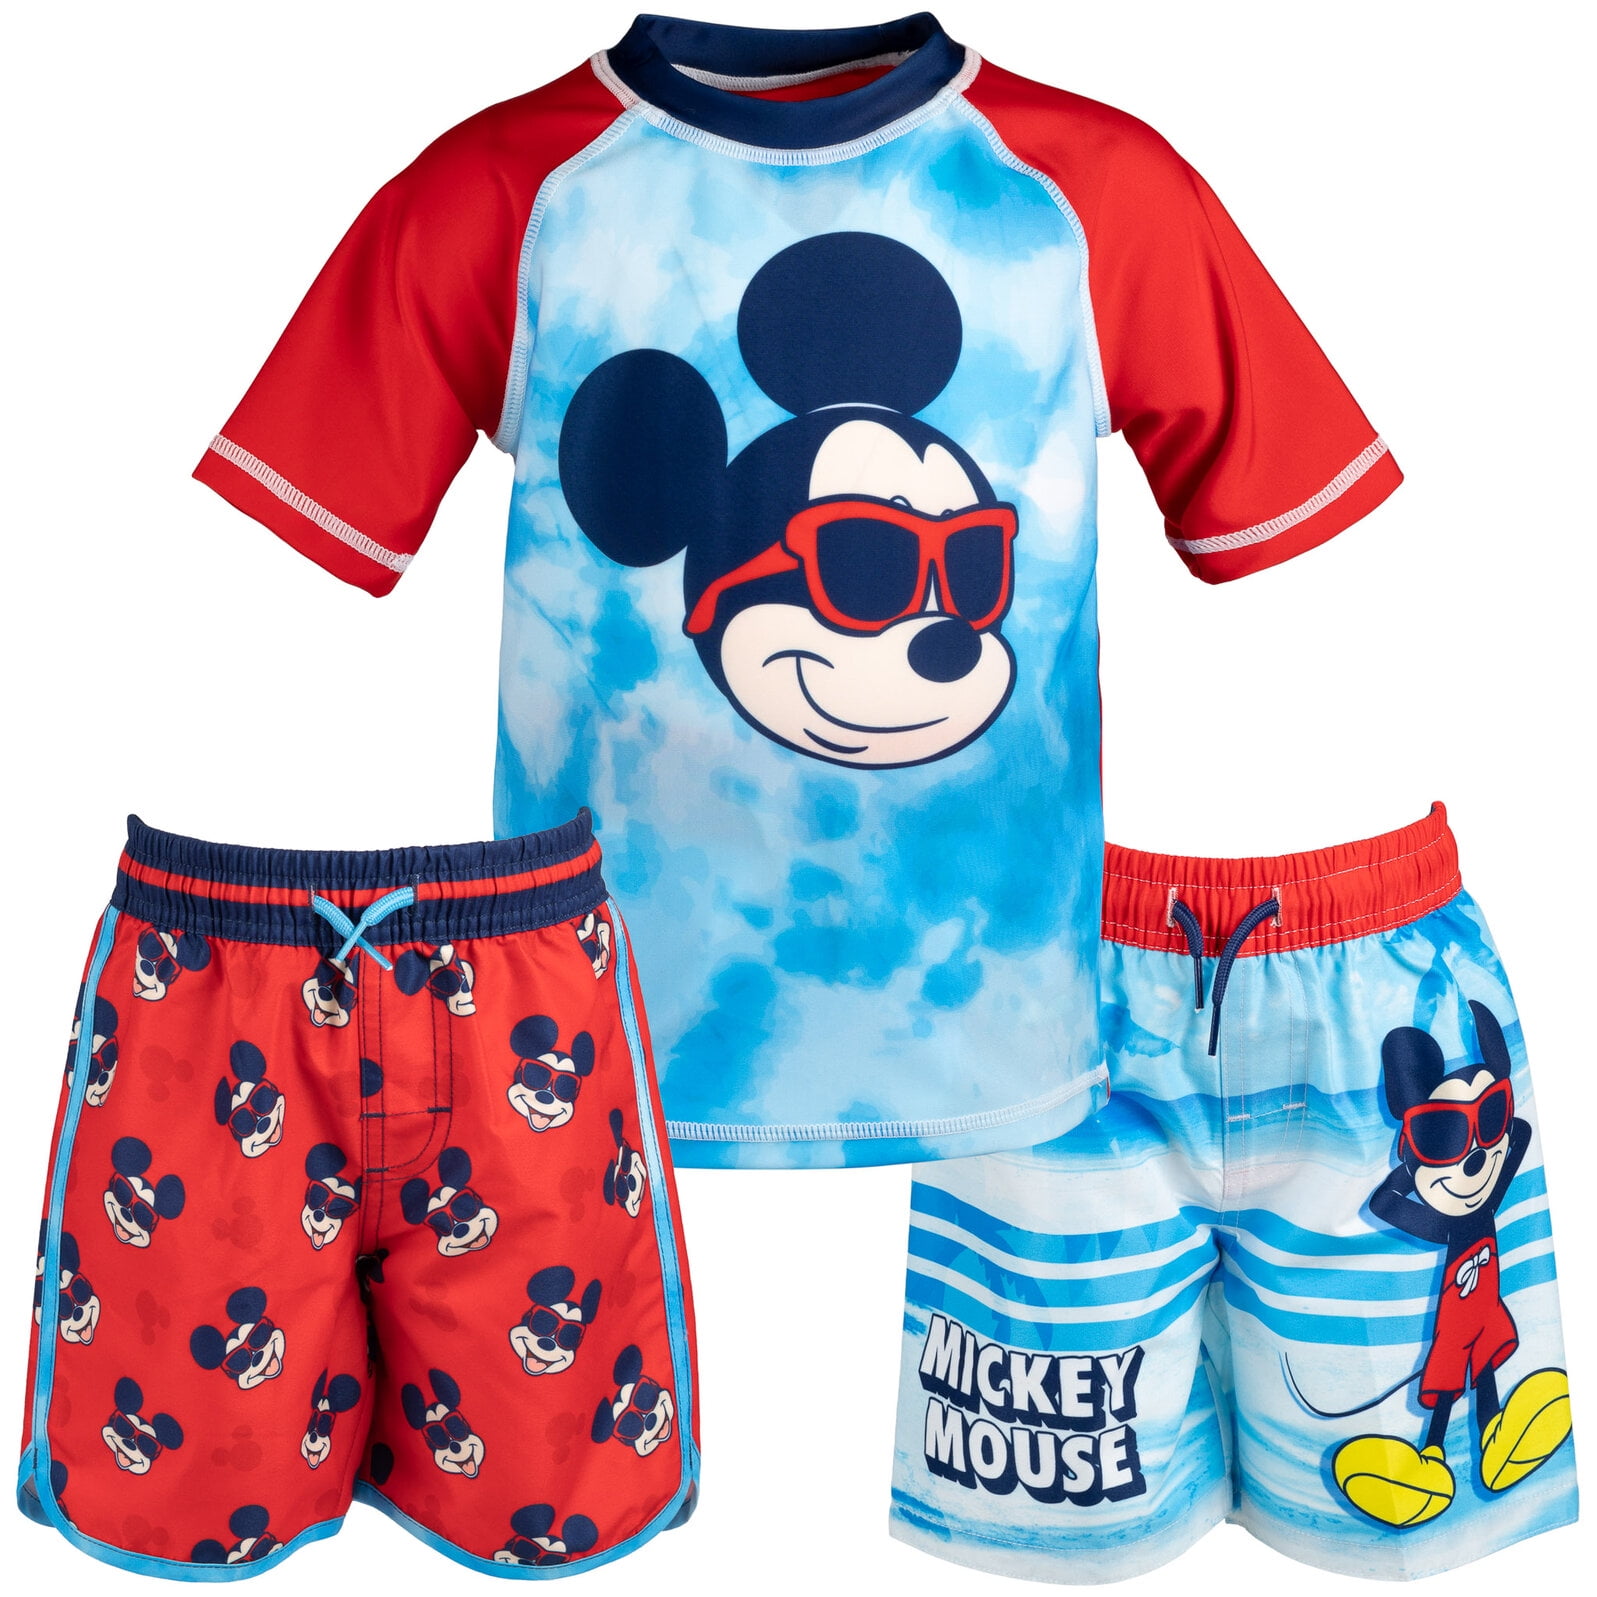 Disney Baby Infant 18 Months Boys Red Mickey Mouse Swim Trunks NEW 